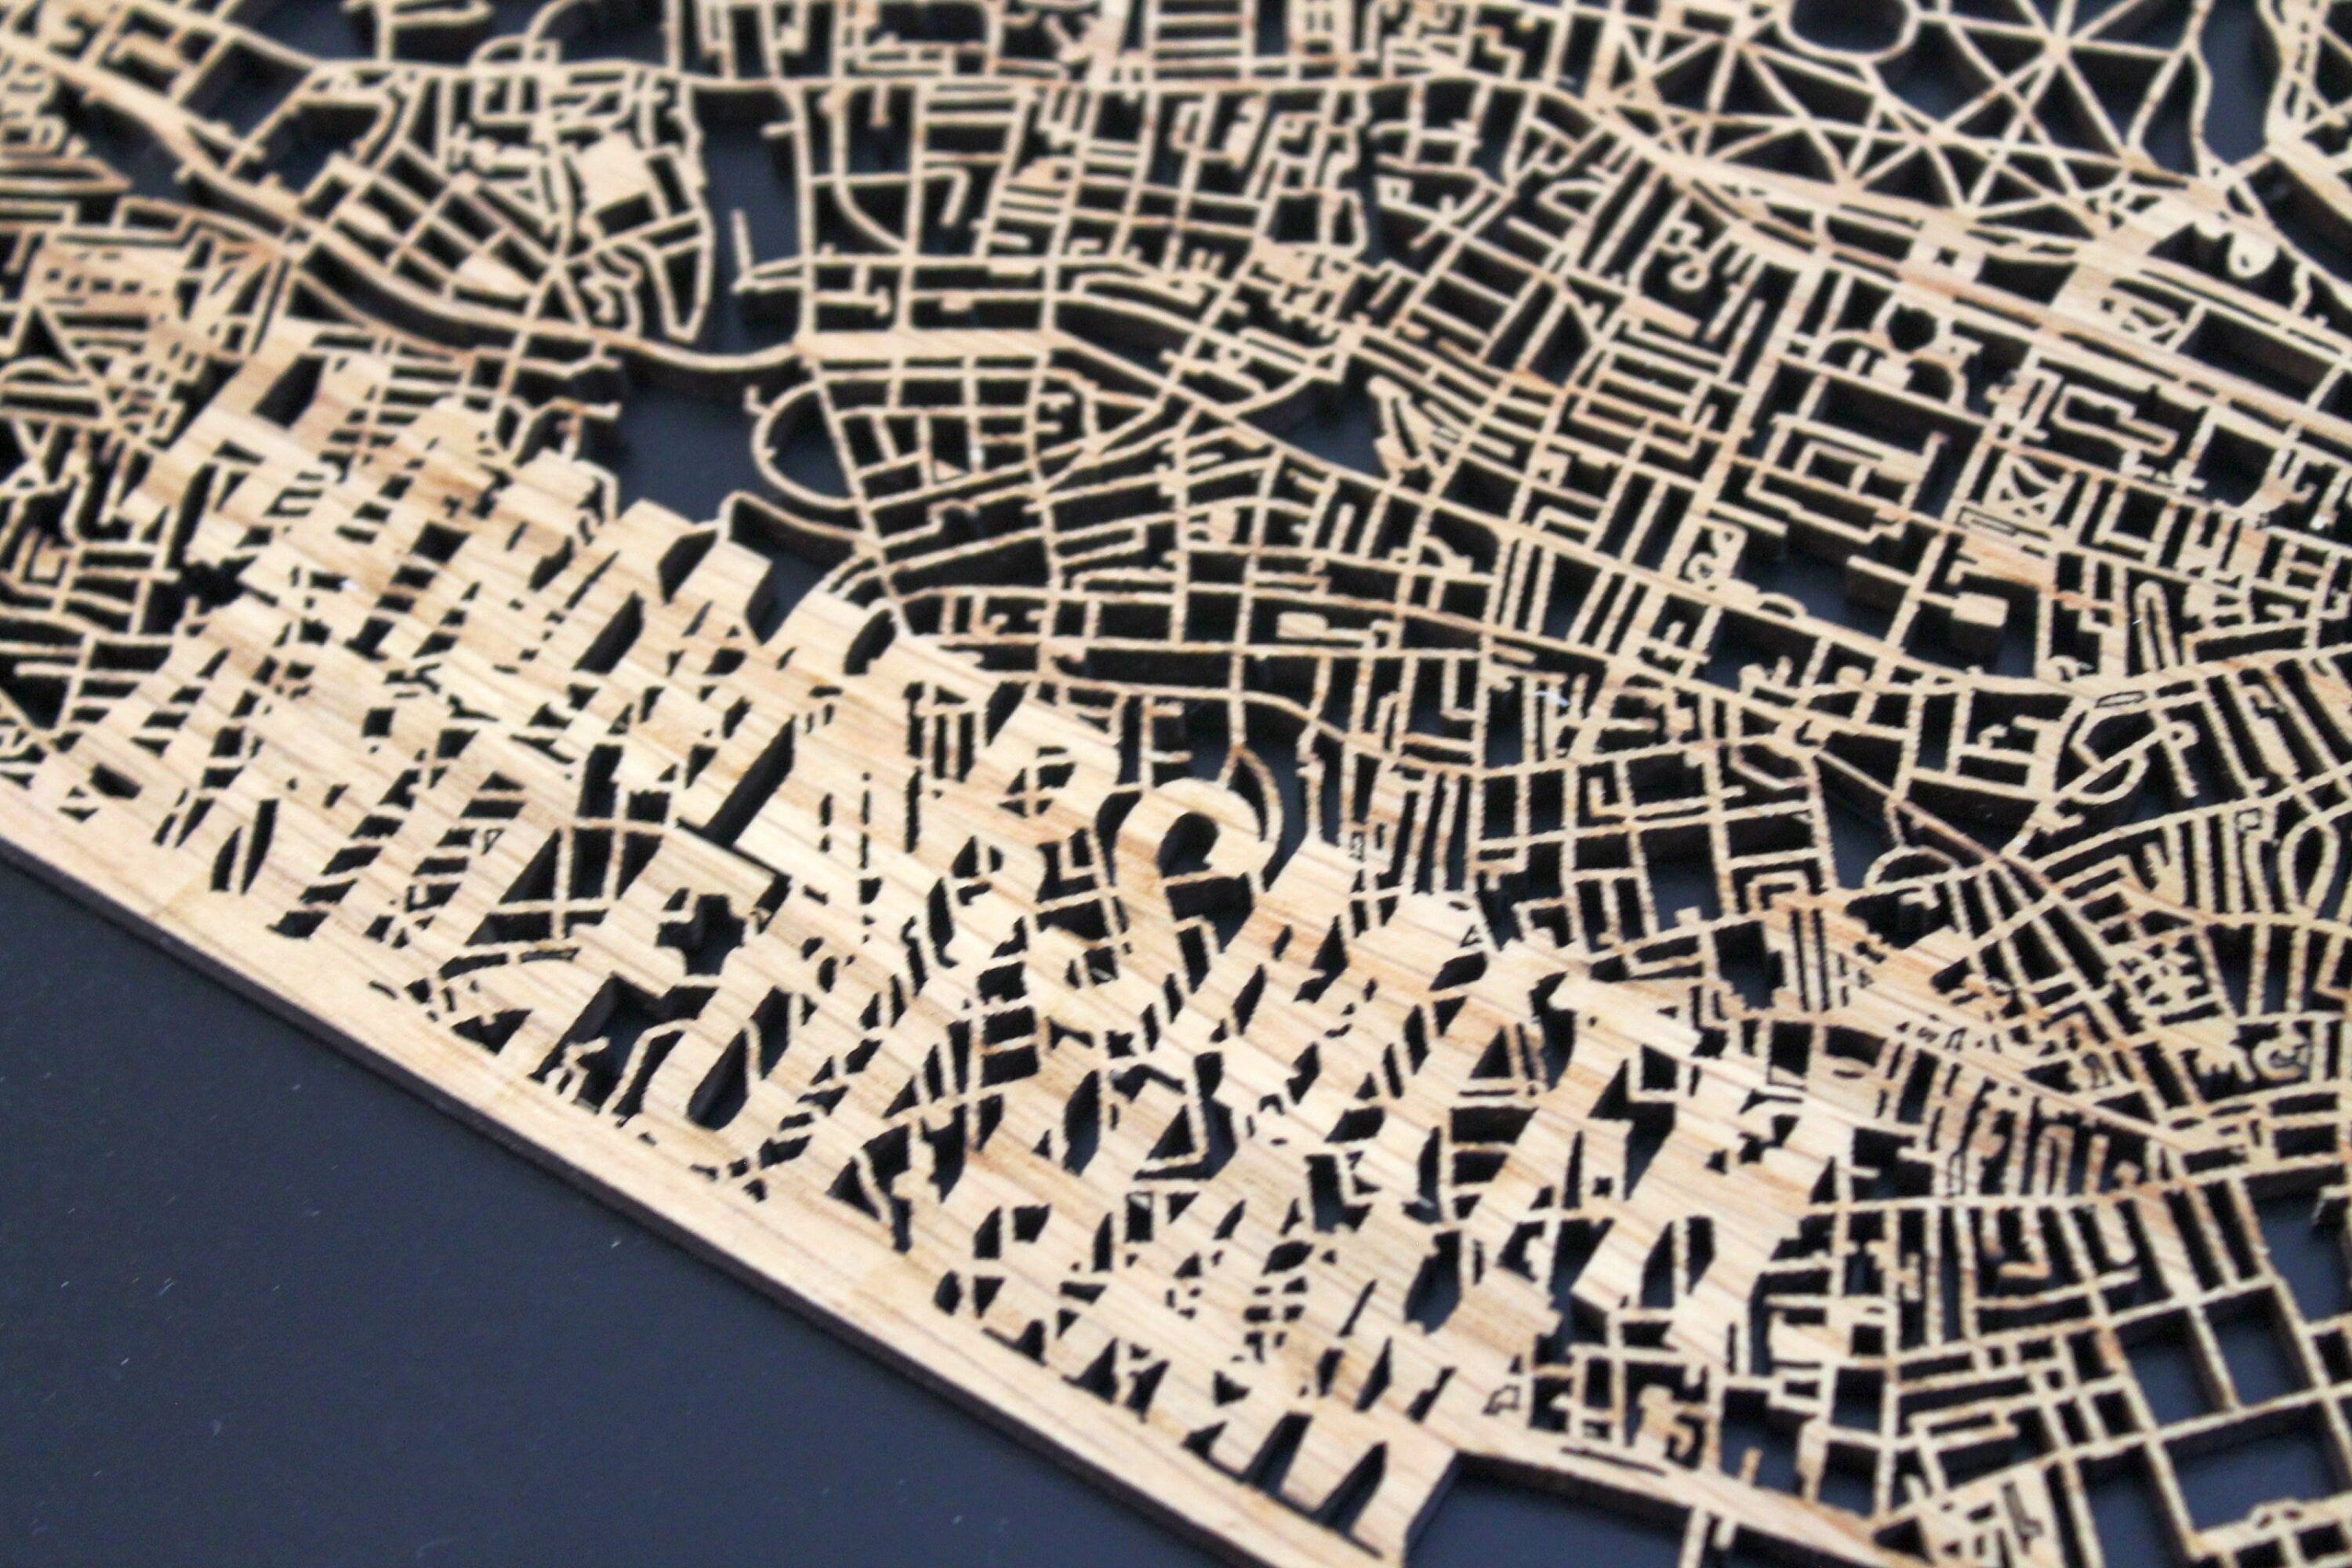 Hammersmith and Fulham Wood Map Laser Cut Street Maps Wooden Map